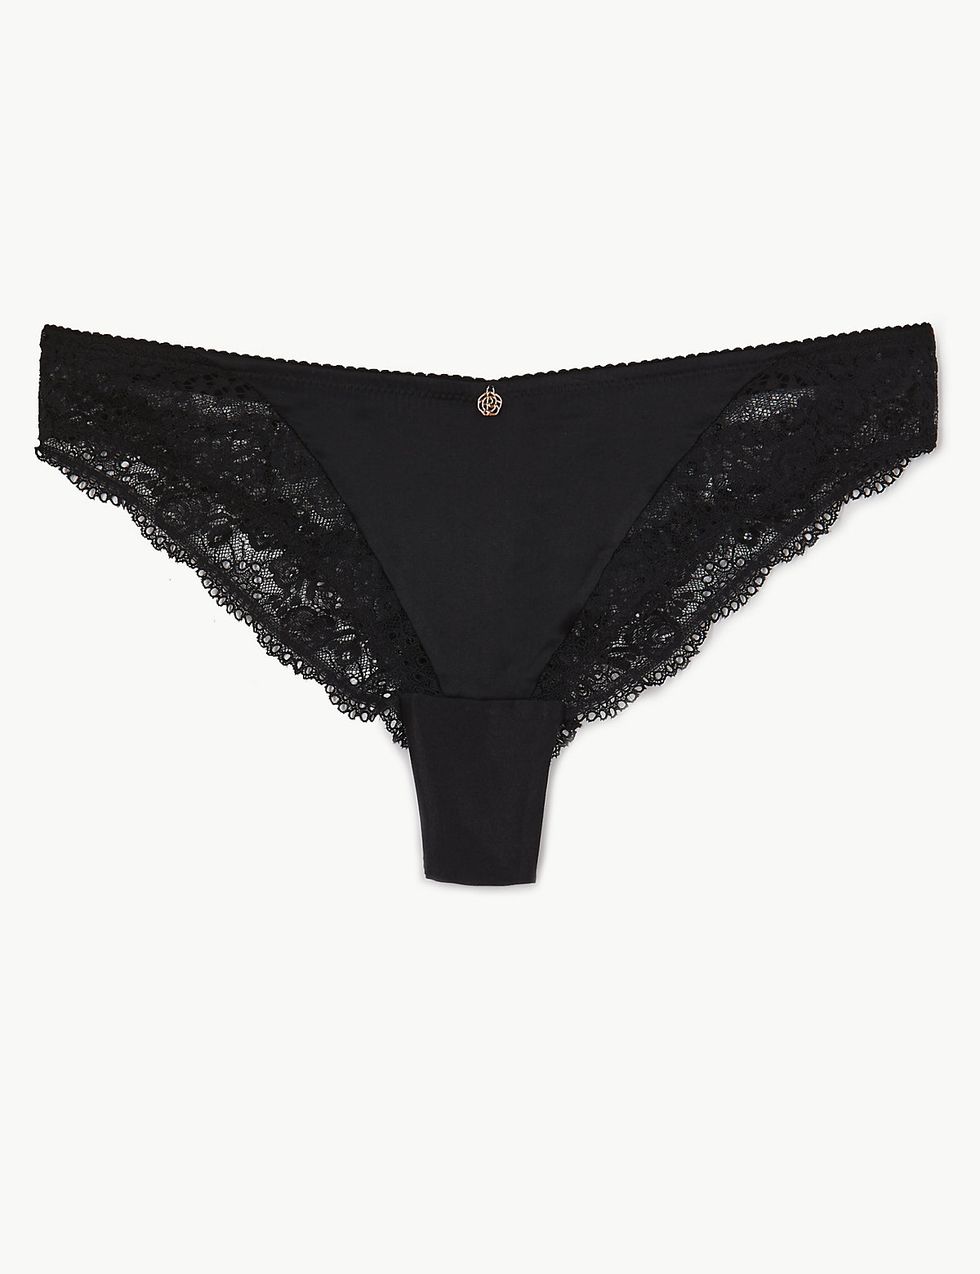 Buy Marks & Spencer No Vpl Low Rise Brazilian Knickers - Black (Pack of 3)  online